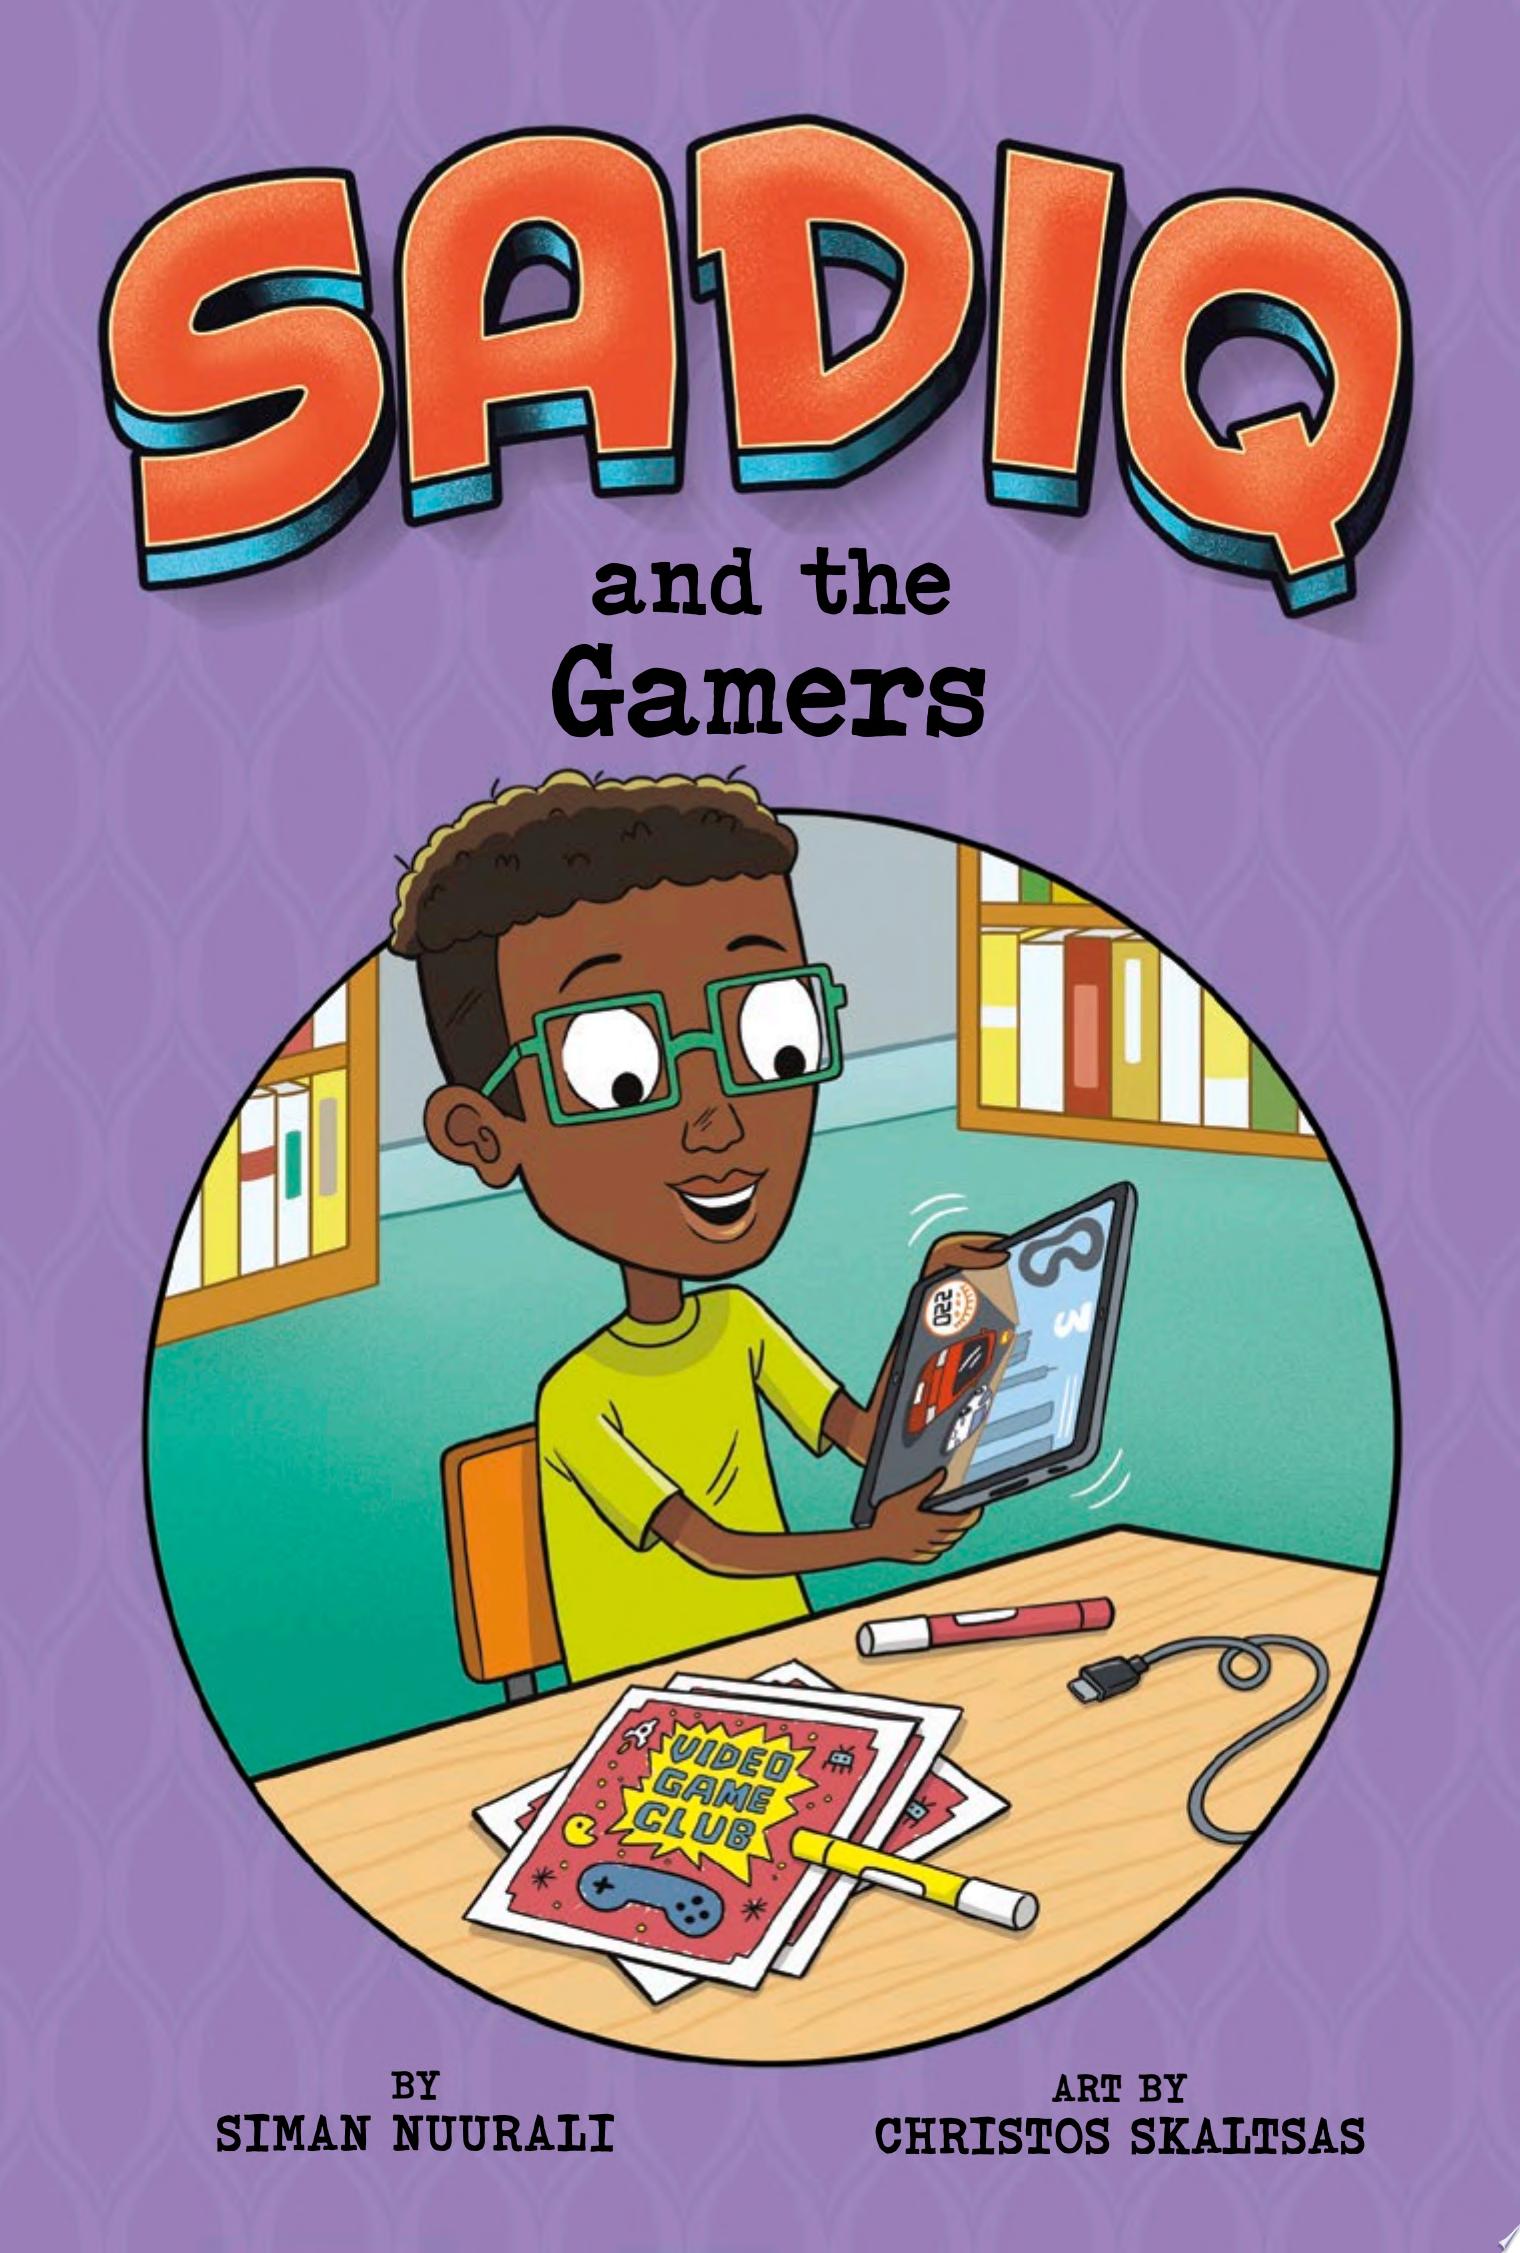 Image for "Sadiq and the Gamers"